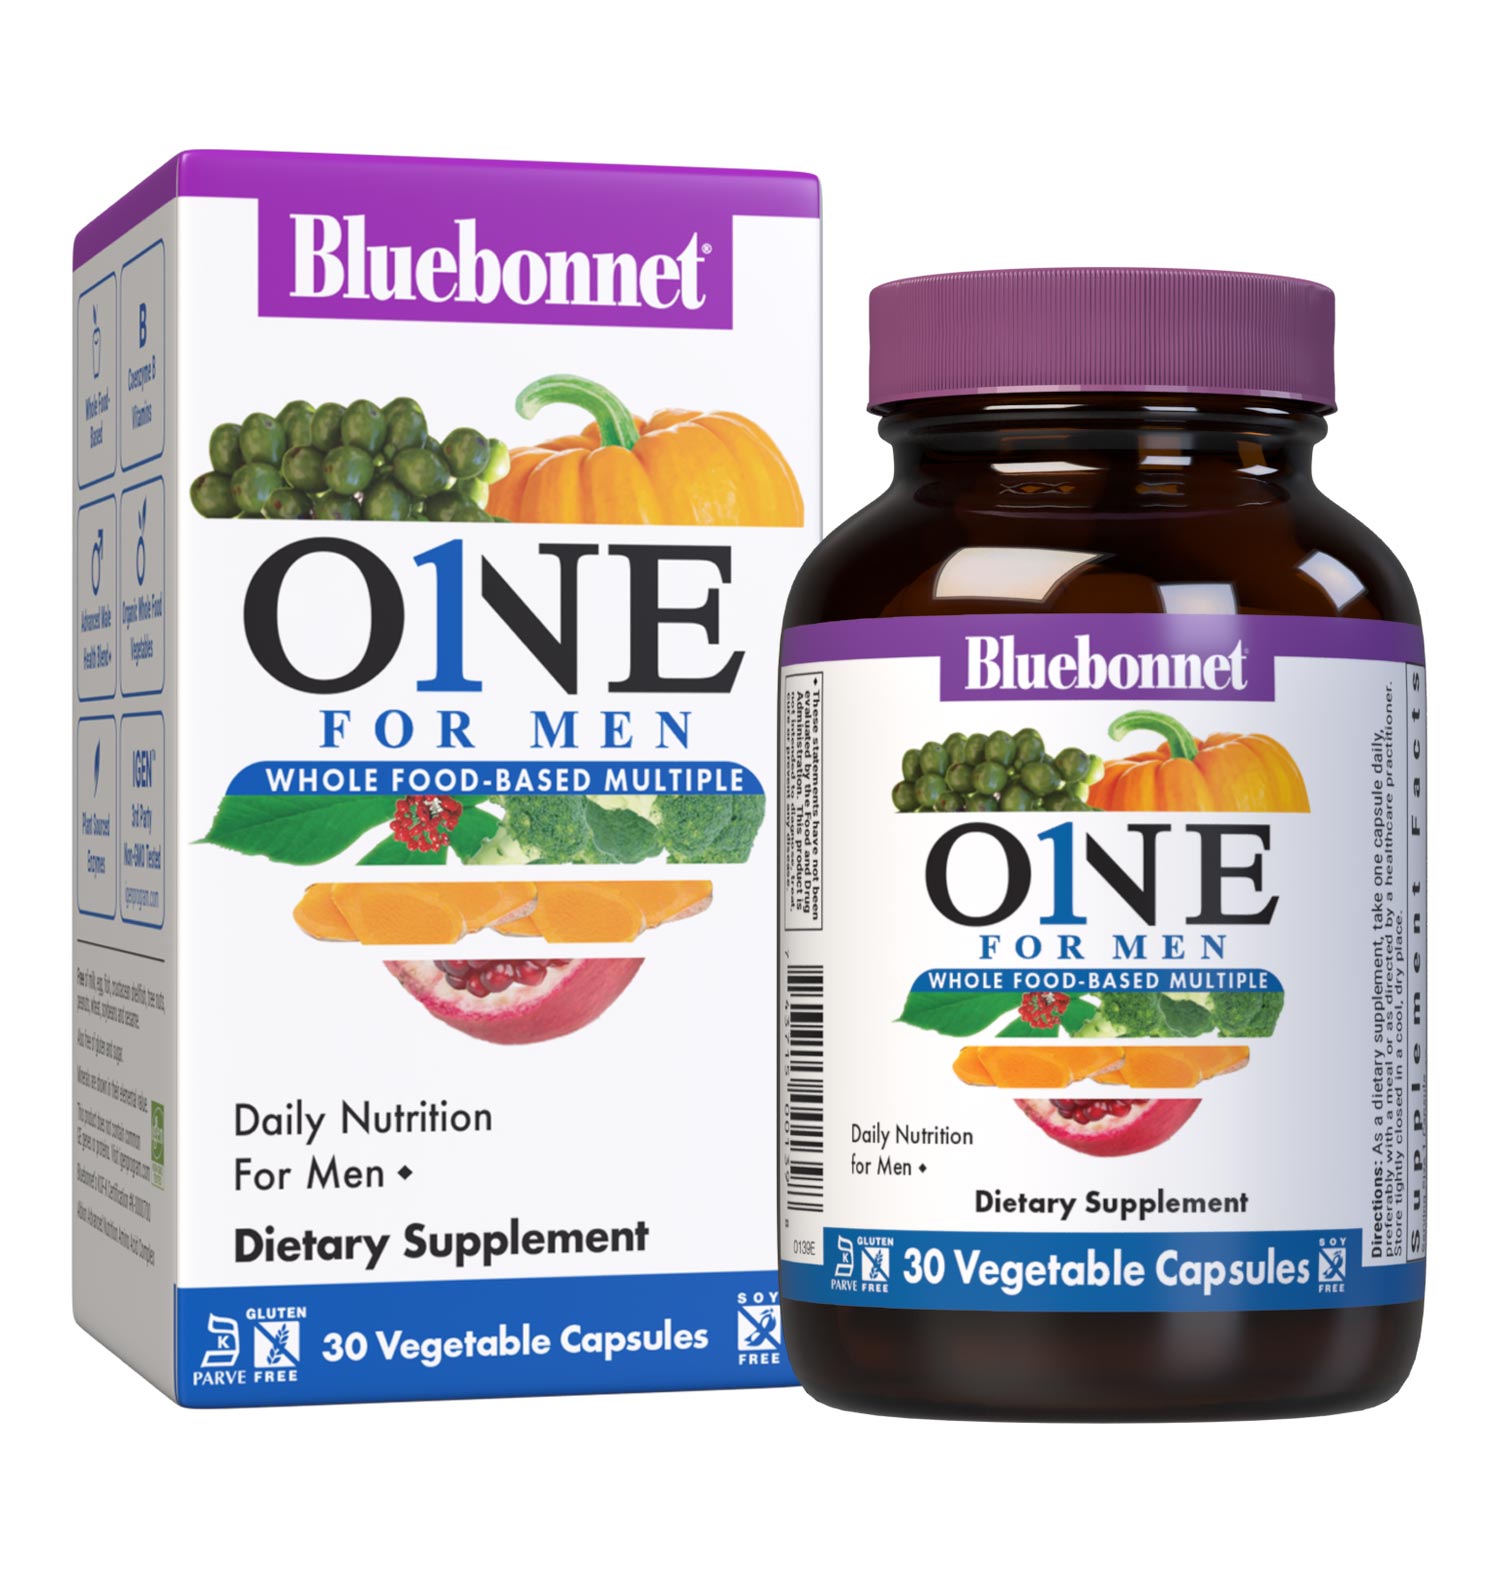 Bluebonnet’s Men's One Whole Food-Based Multiple 30 vegetable capsules is formulated with over 25 crucial nutrients like vitamin K2 and vitamin E from sunflower, all the coenzyme forms of the B vitamins, plus Albion chelated minerals in addition to an organic whole food vegetable blend, a plant-sourced enzyme blend, and a unique male health blend for daily nutrition and well being. Bottle with box #size_30 count